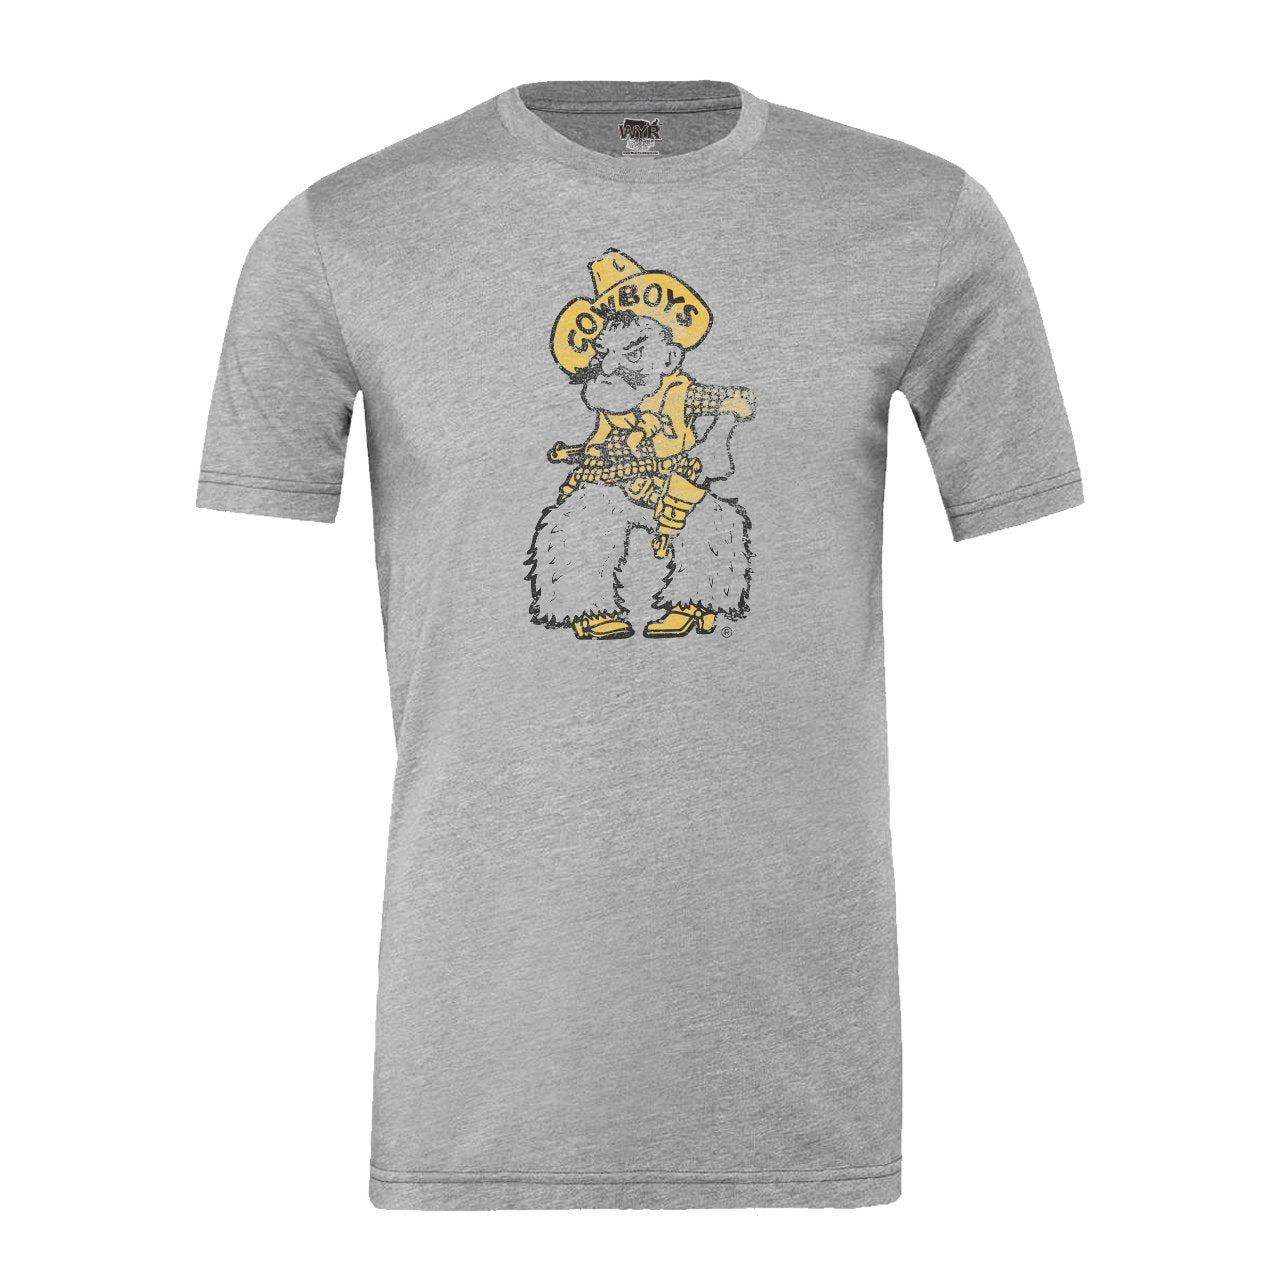 University of Wyoming Pistol Pete T-Shirt Full Color - WYR